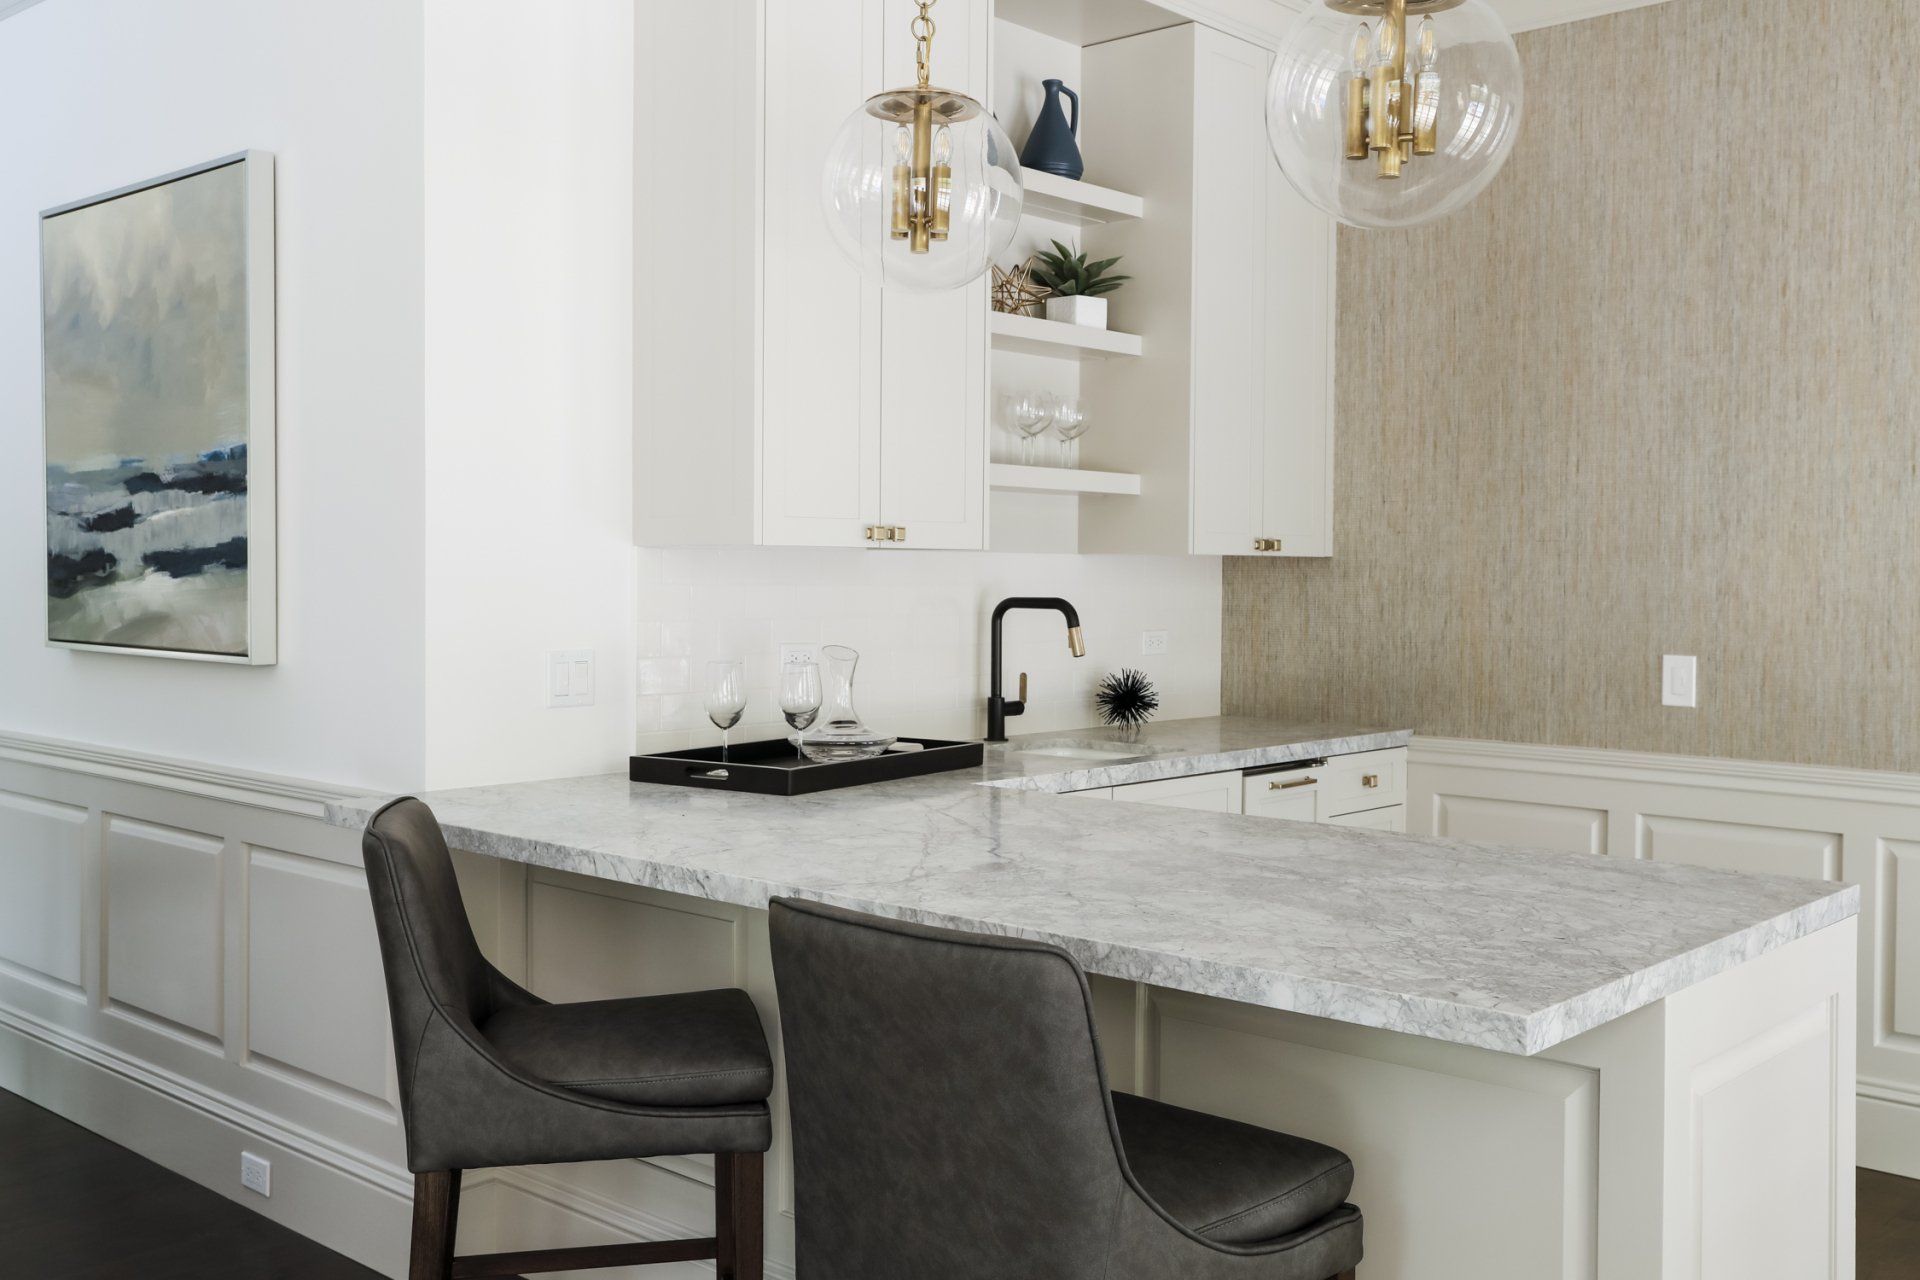 Supple Homes project in Atherton California. L-shaped wet bar with white cabinets and white countertops and gray leather bar stools. Two light pendants with gold hanging from the ceiling over the bar.